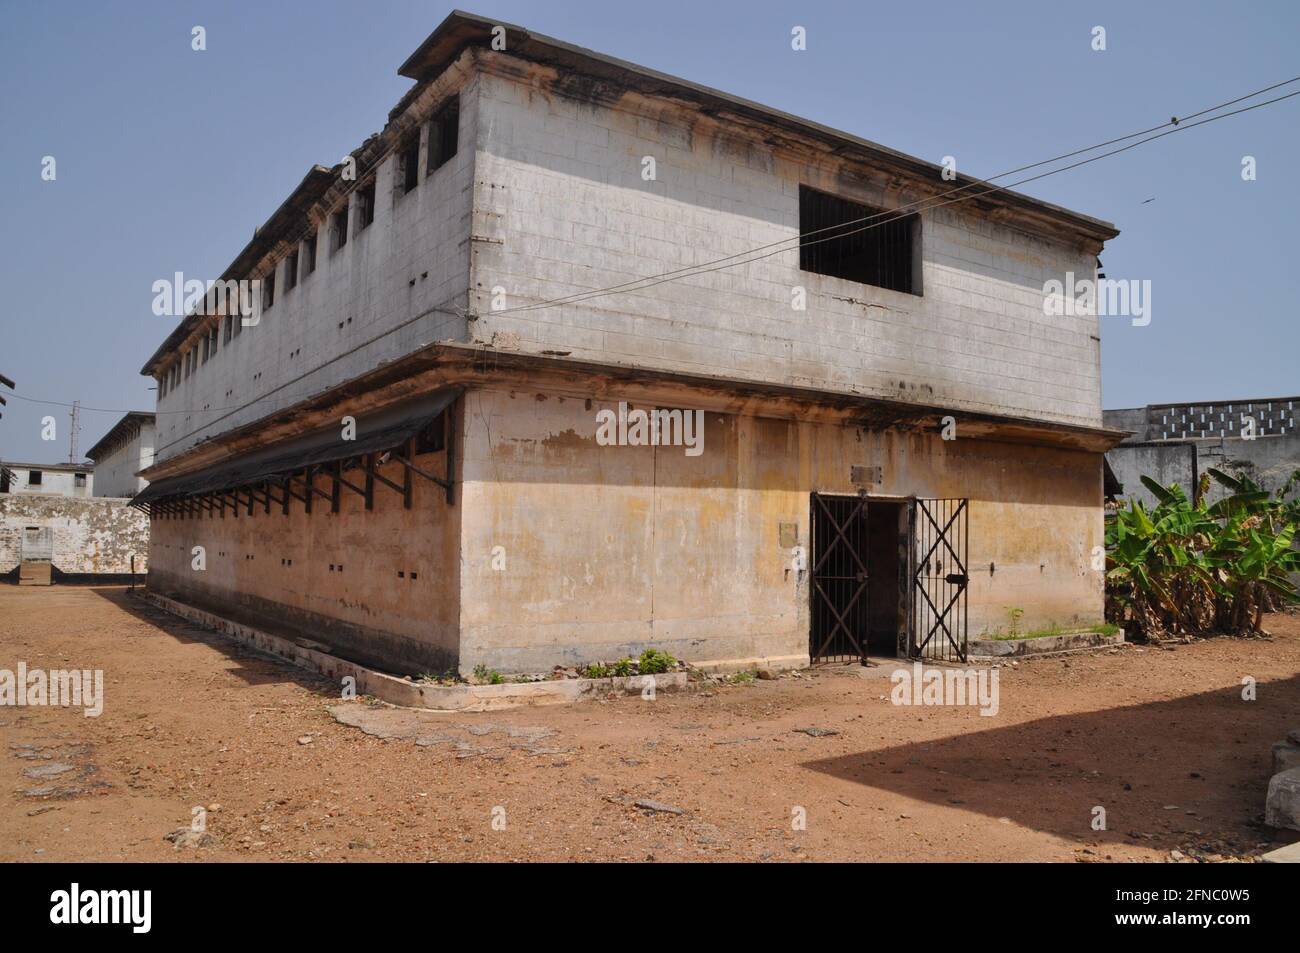 Abandoned prison in the former Ussher Fort in Accra, Ghana. Stock Photo